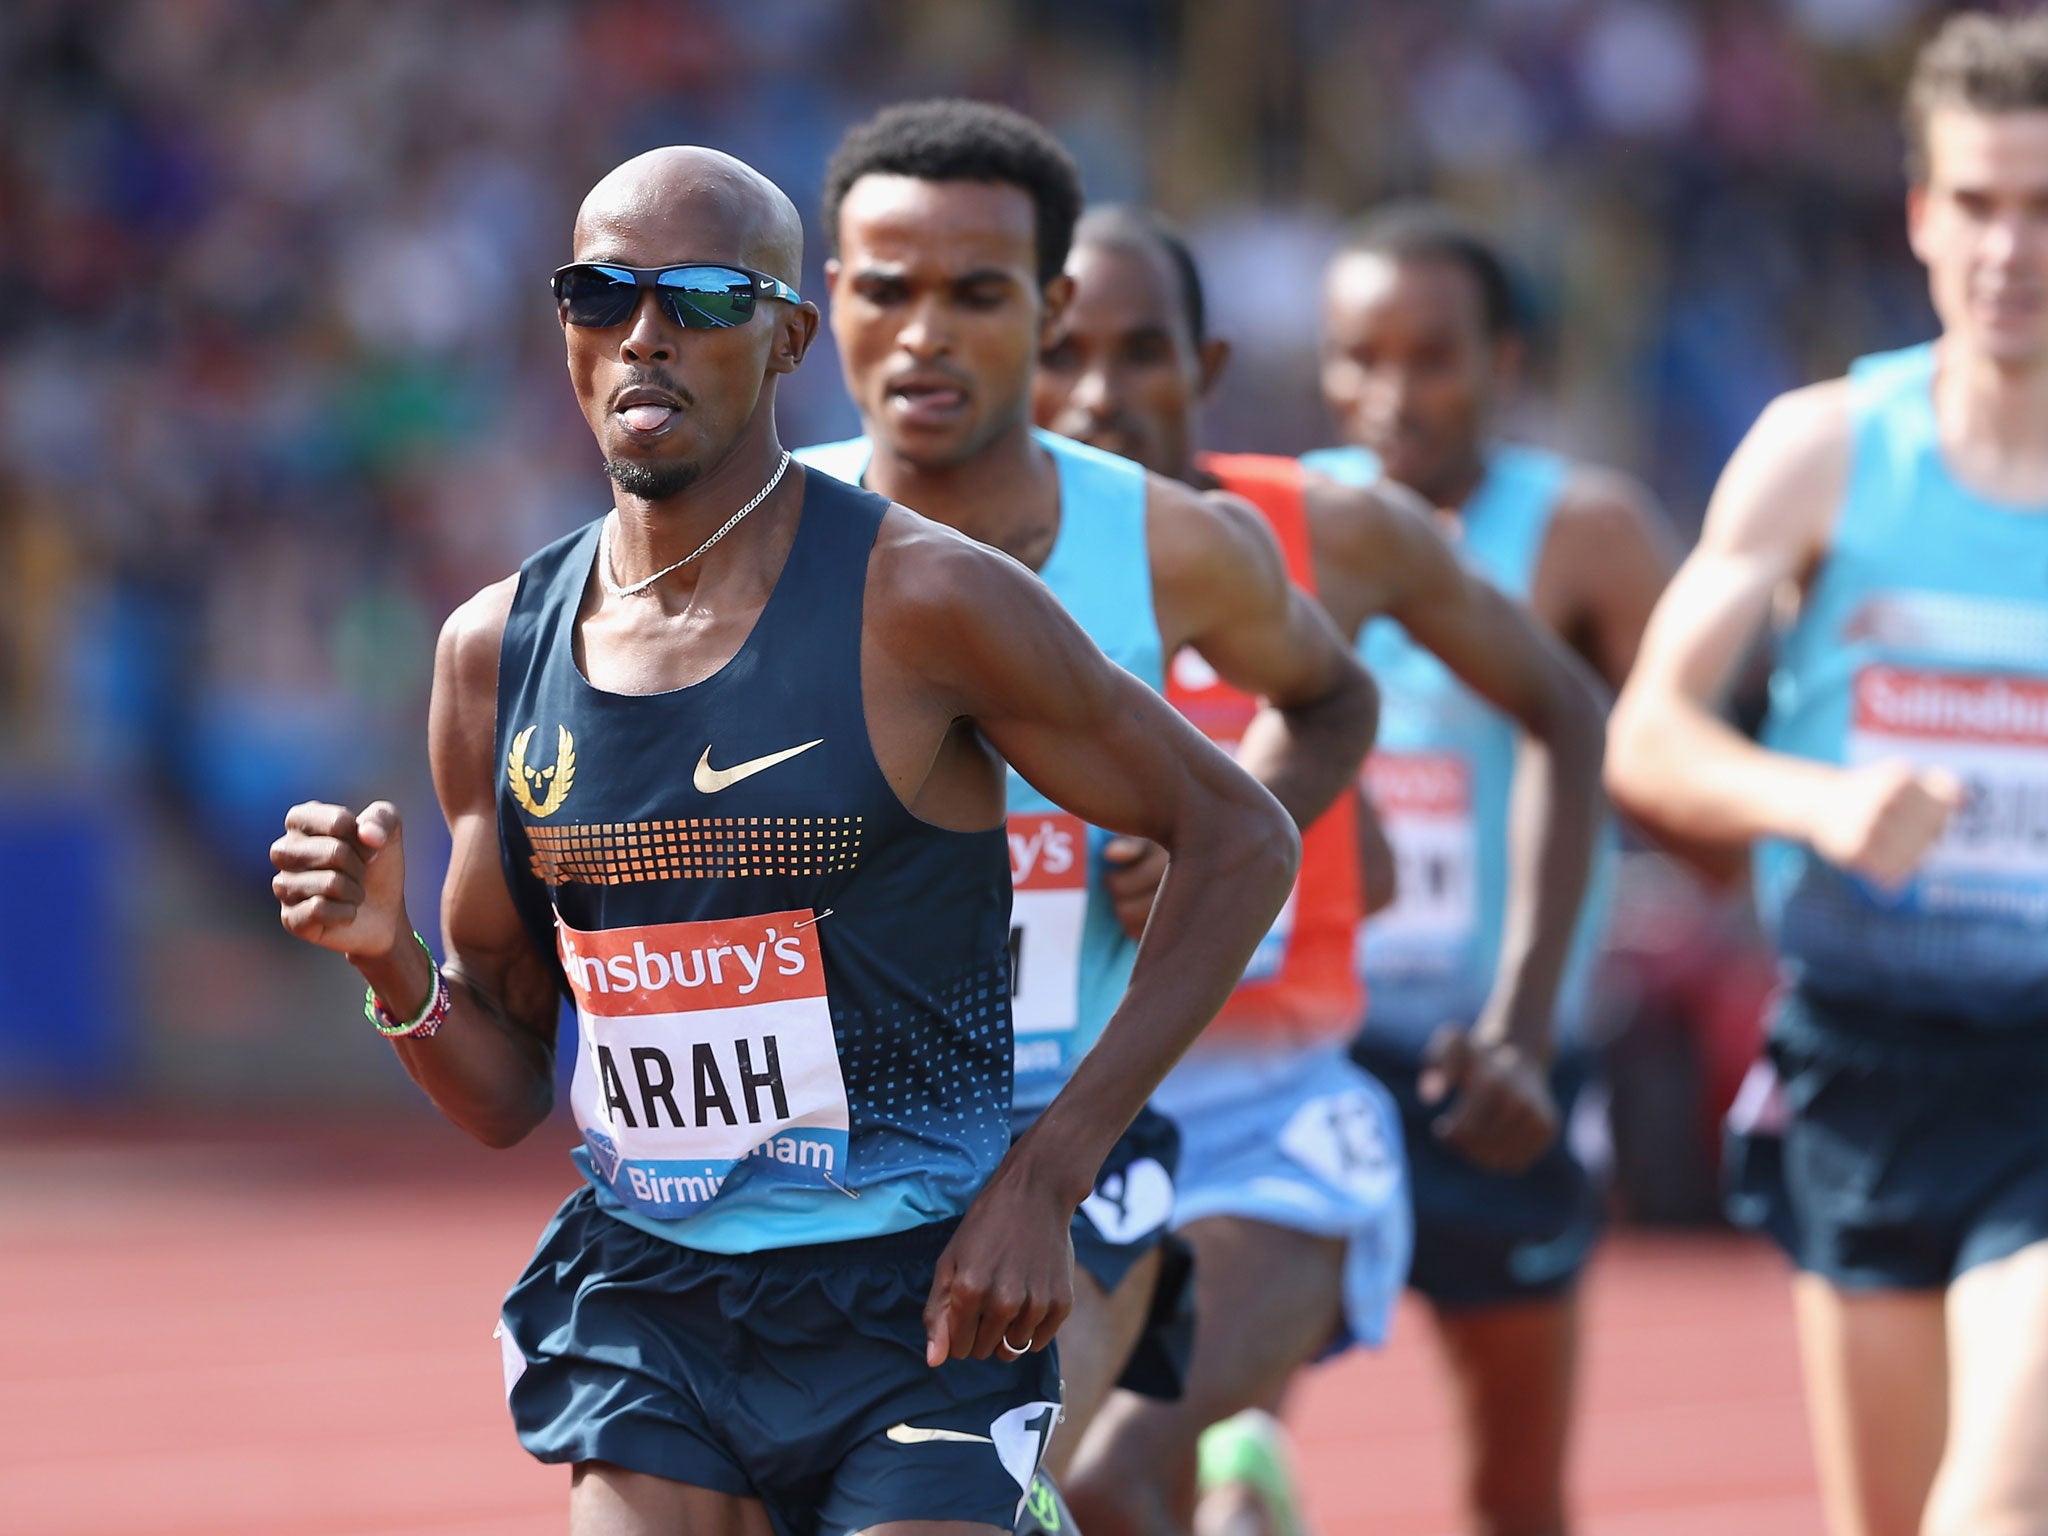 Mo Farah on his way to victory in the 5,000m